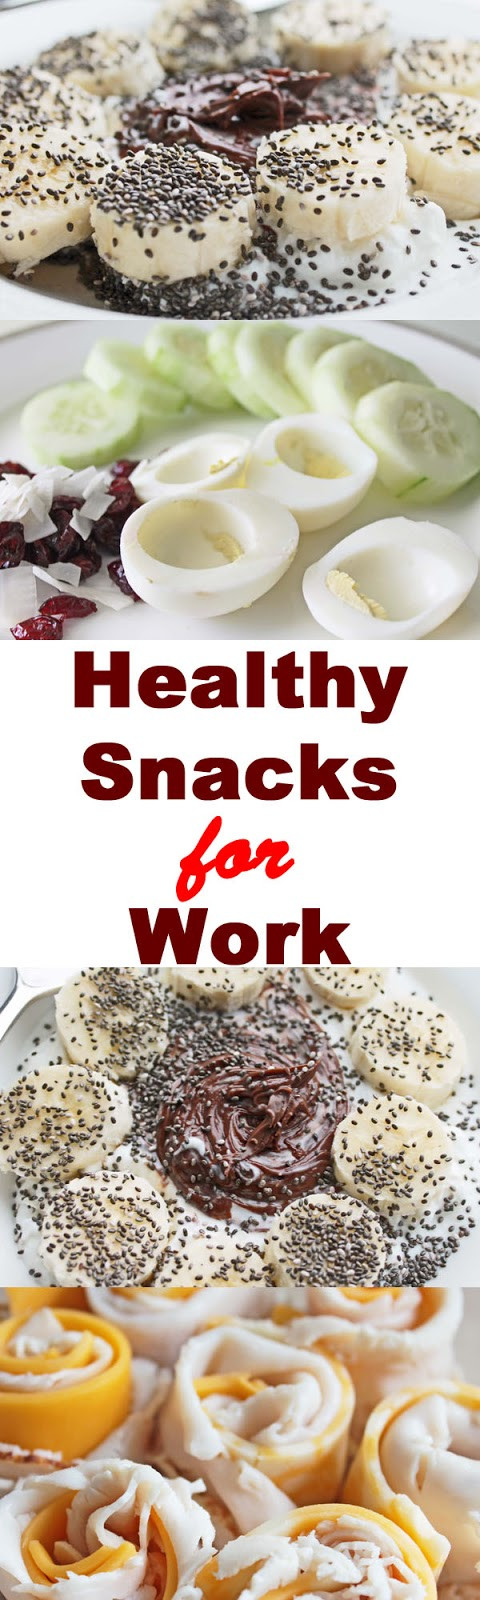 Healthy Snacks For Adults
 Healthy Snacks for Work Daily Re mendations 13